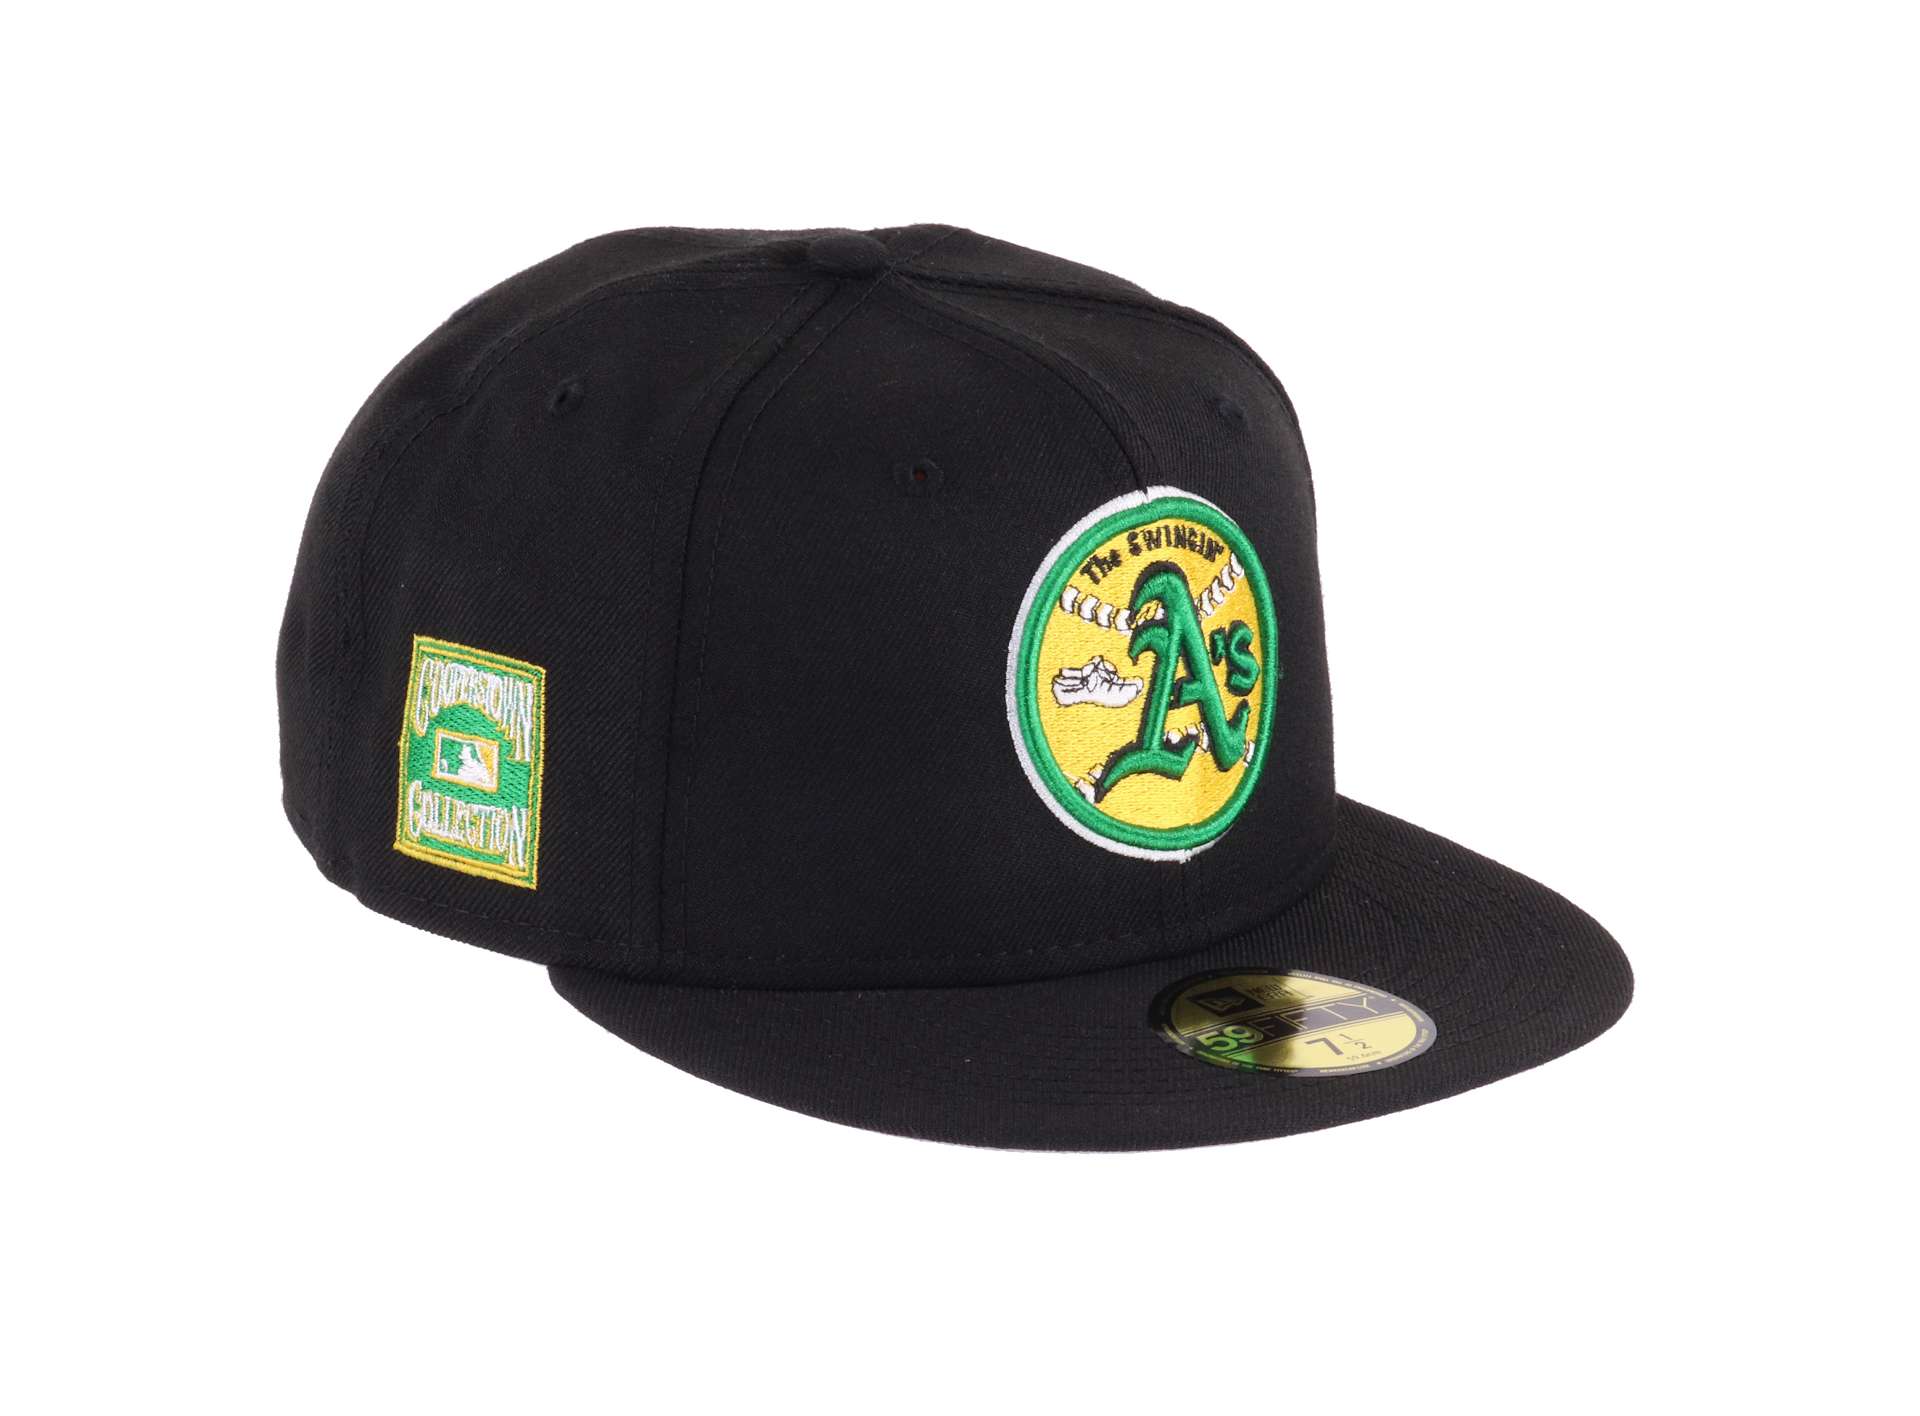 Oakland Athletics Cooperstown Collection MLB Black 59Fifty Basecap New Era